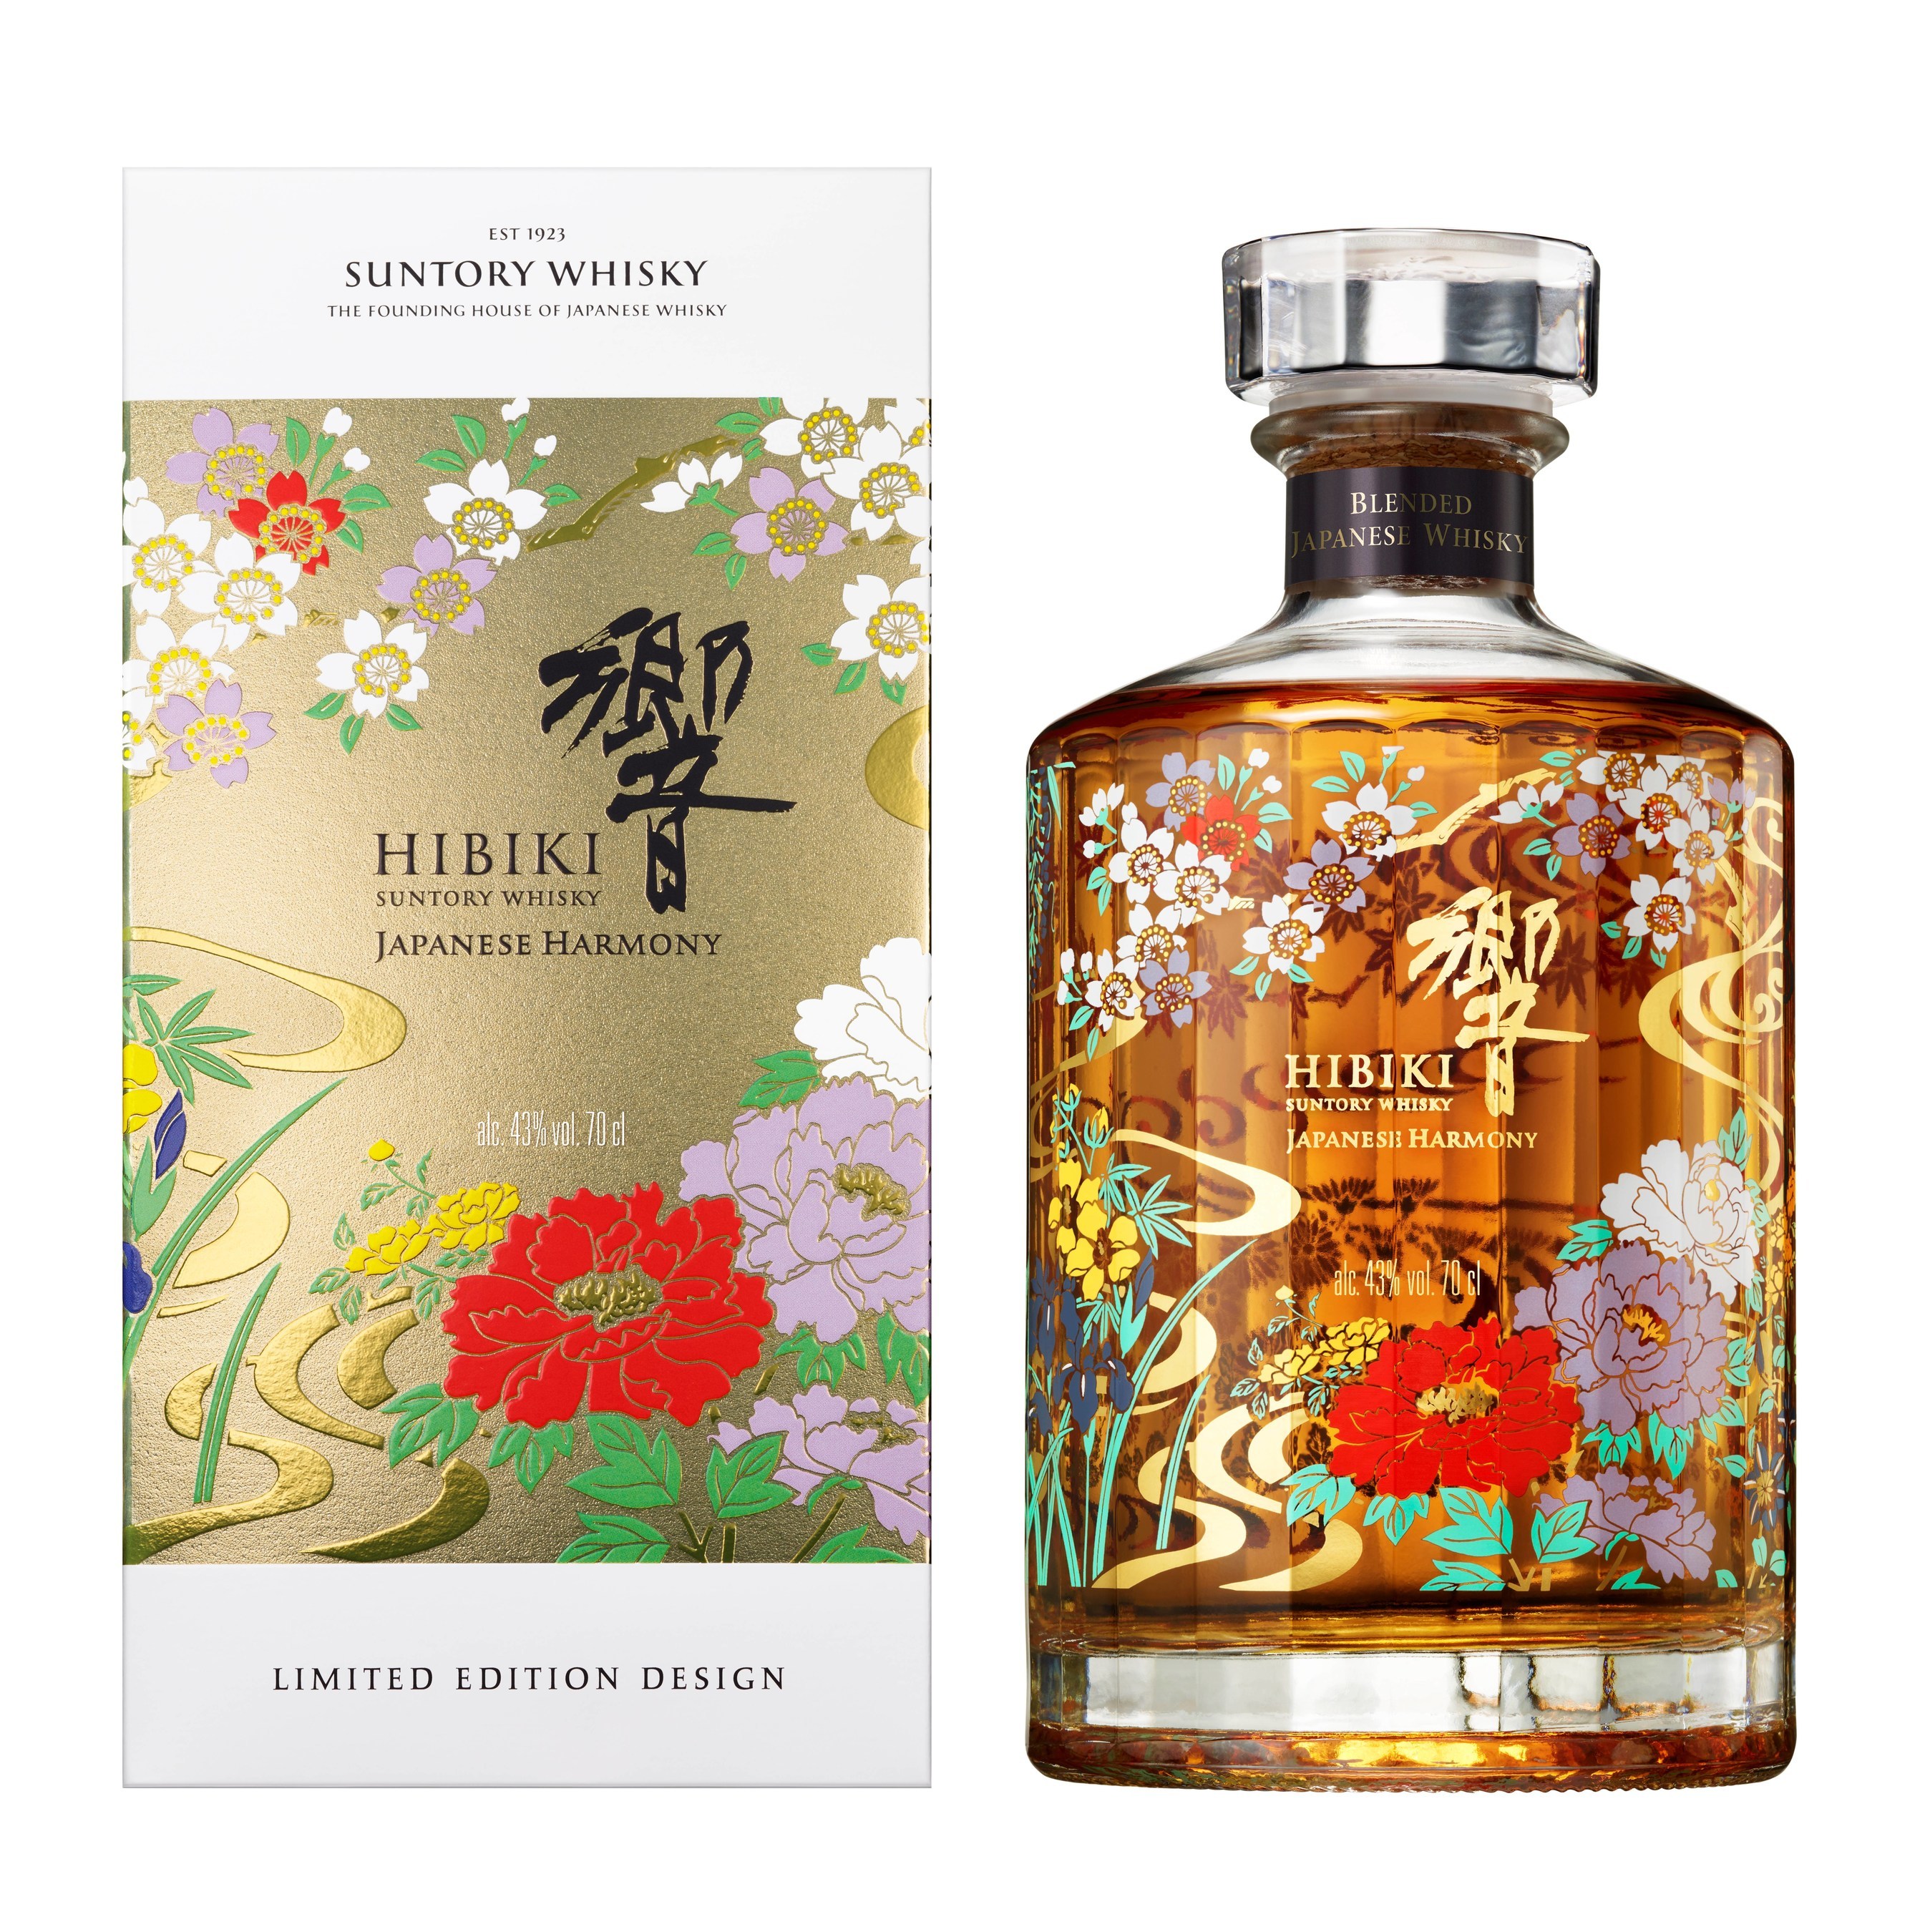 The House Of Suntory Debuts The 2021 LimitedEdition Design Bottle Of